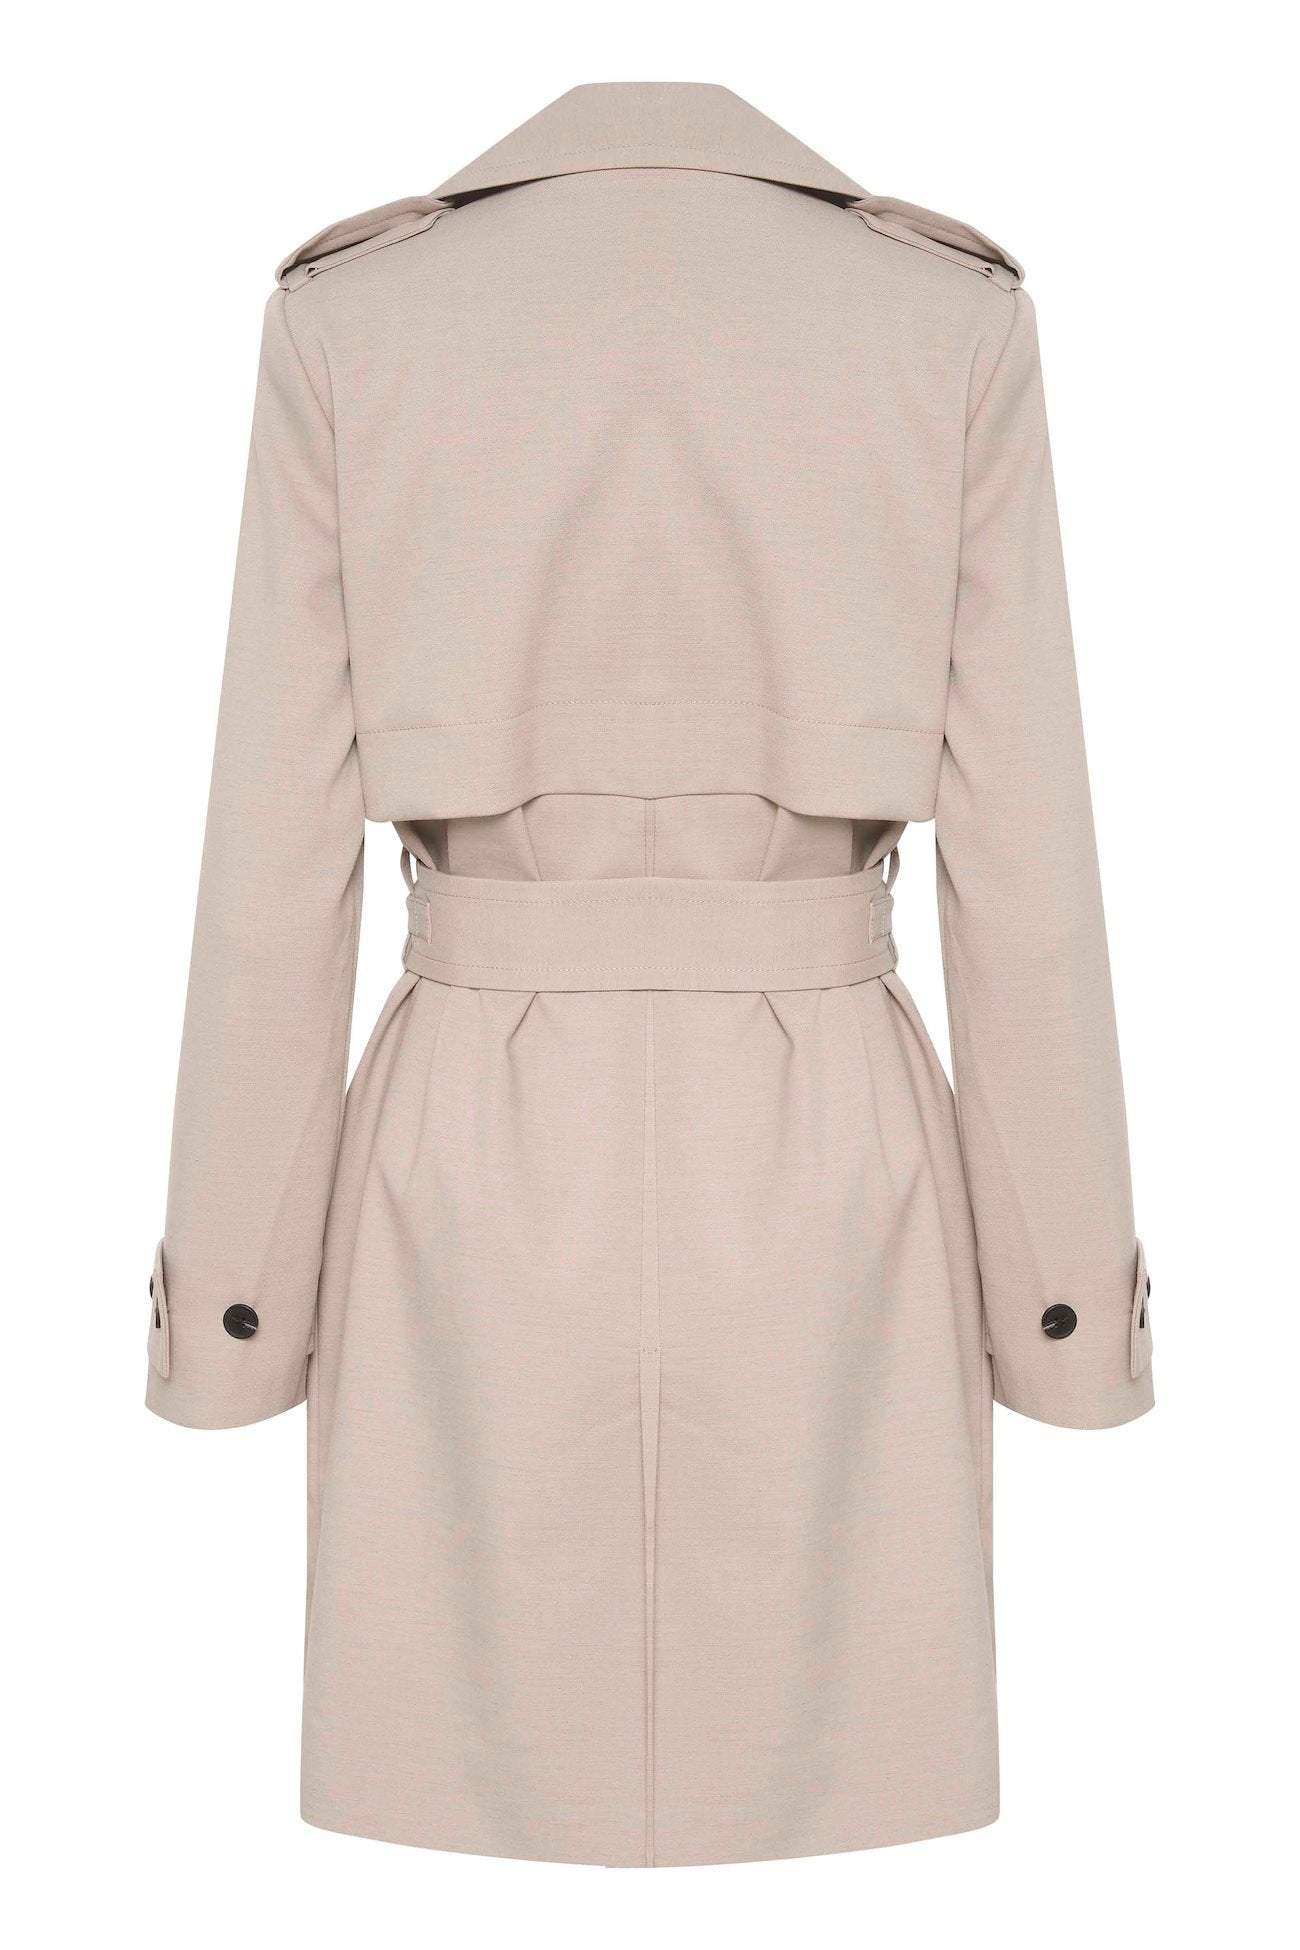 Inwear Tinah Taupe Belted Trench Coat From The back